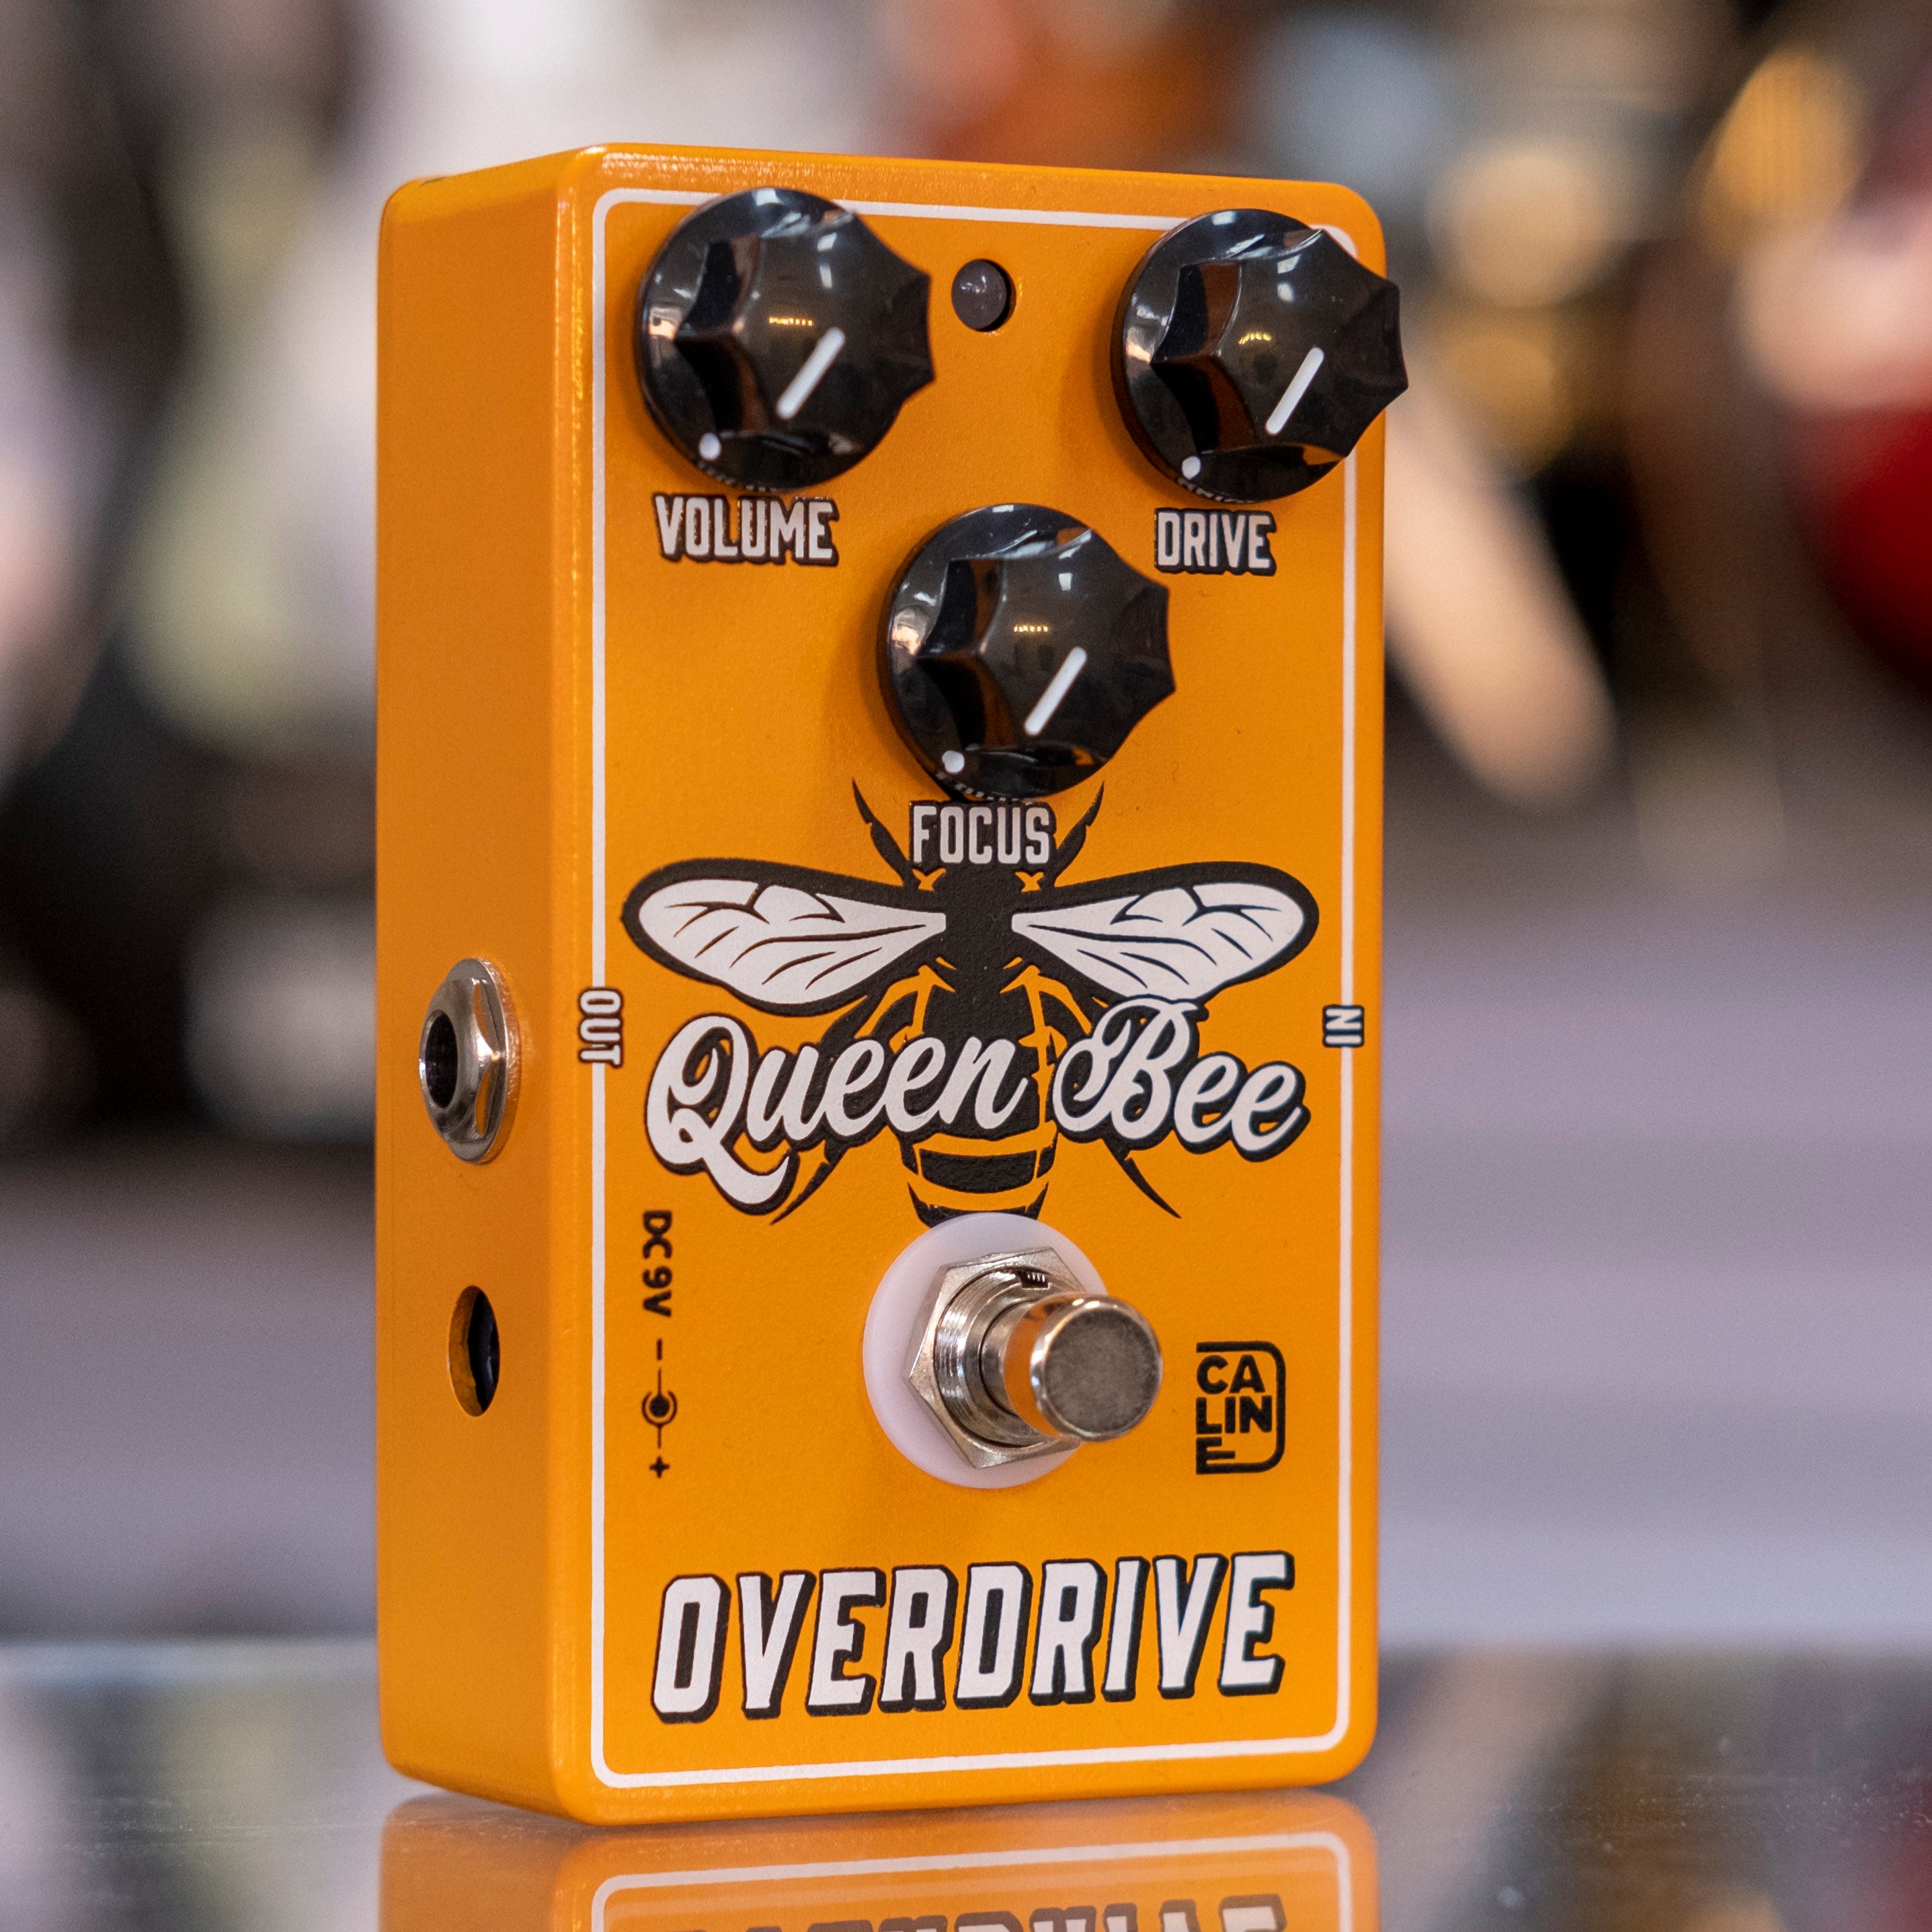 Caline CP-503 Queen Bee Overdrive Pedal